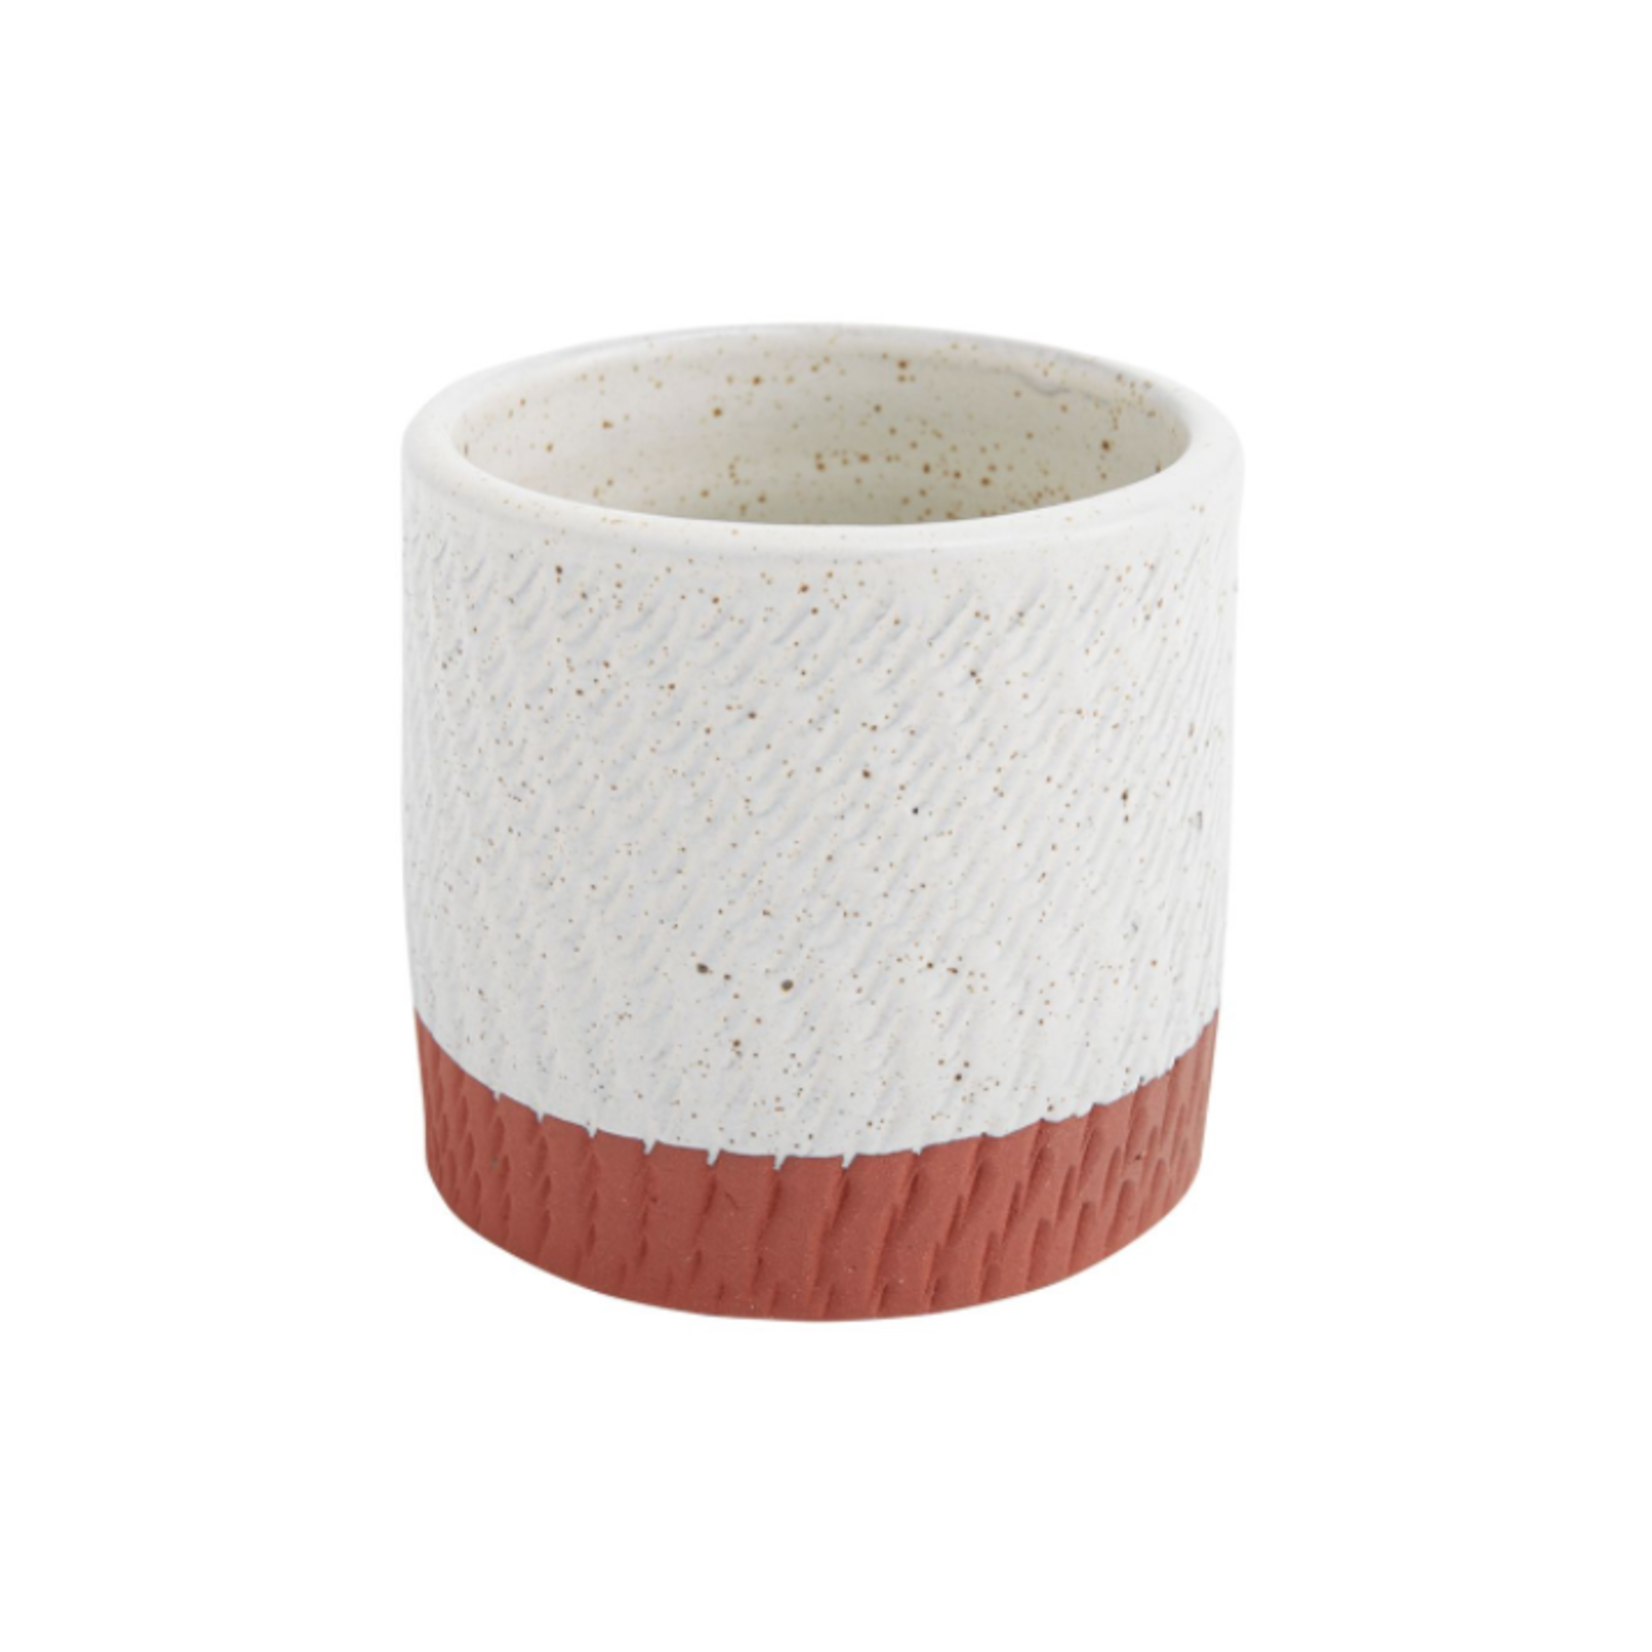 60% OFF WAS $6.09 NOW $2.44, 4.5” X 4.5” WHITE TERRACOTTA CERAMIC COMO COLLECTION POT (AD)